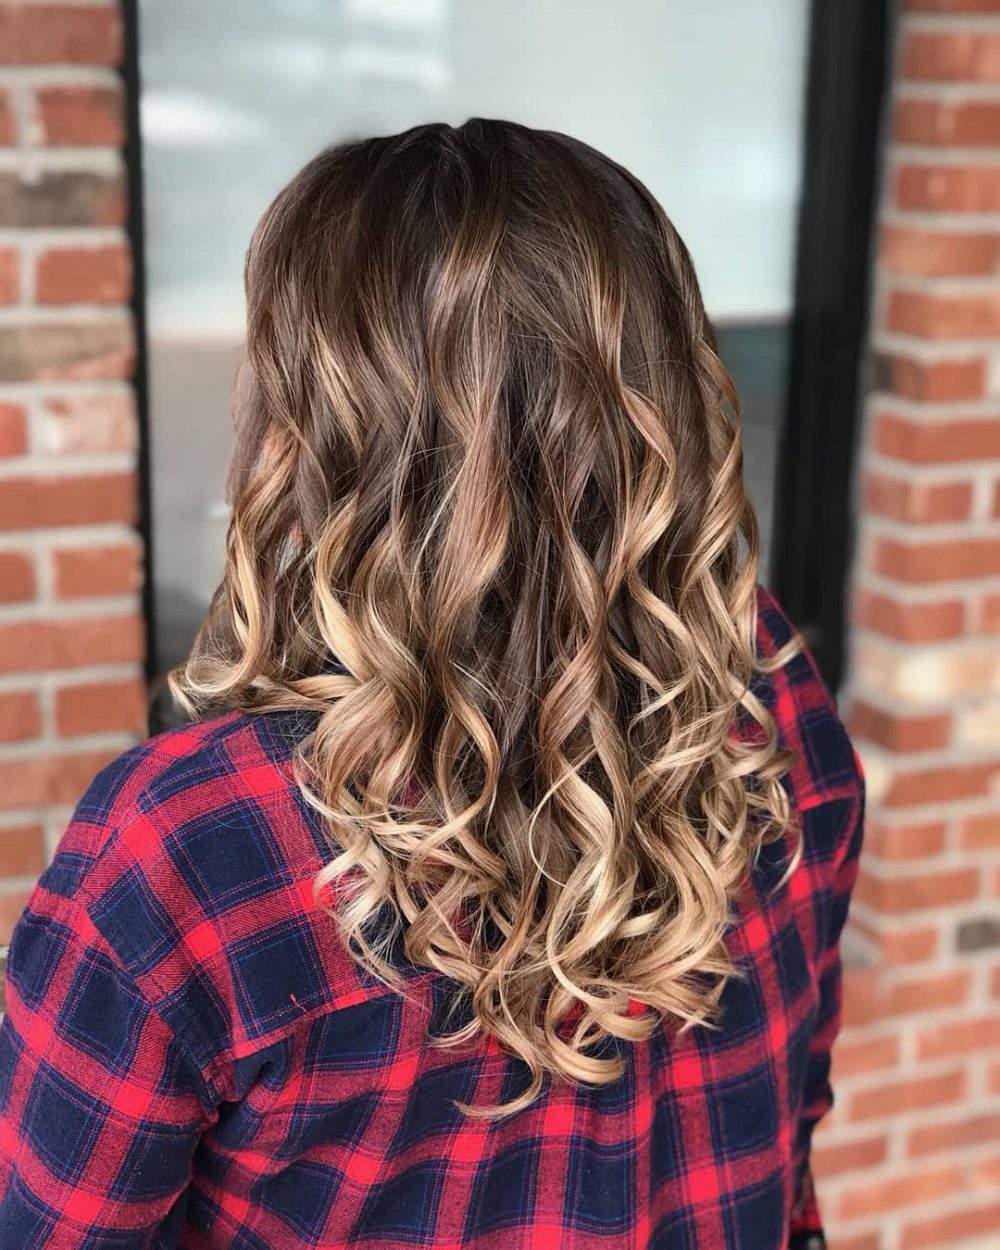 36 Curled Hairstyles Tending In 2018 So Grab Your Hair Curling Wand